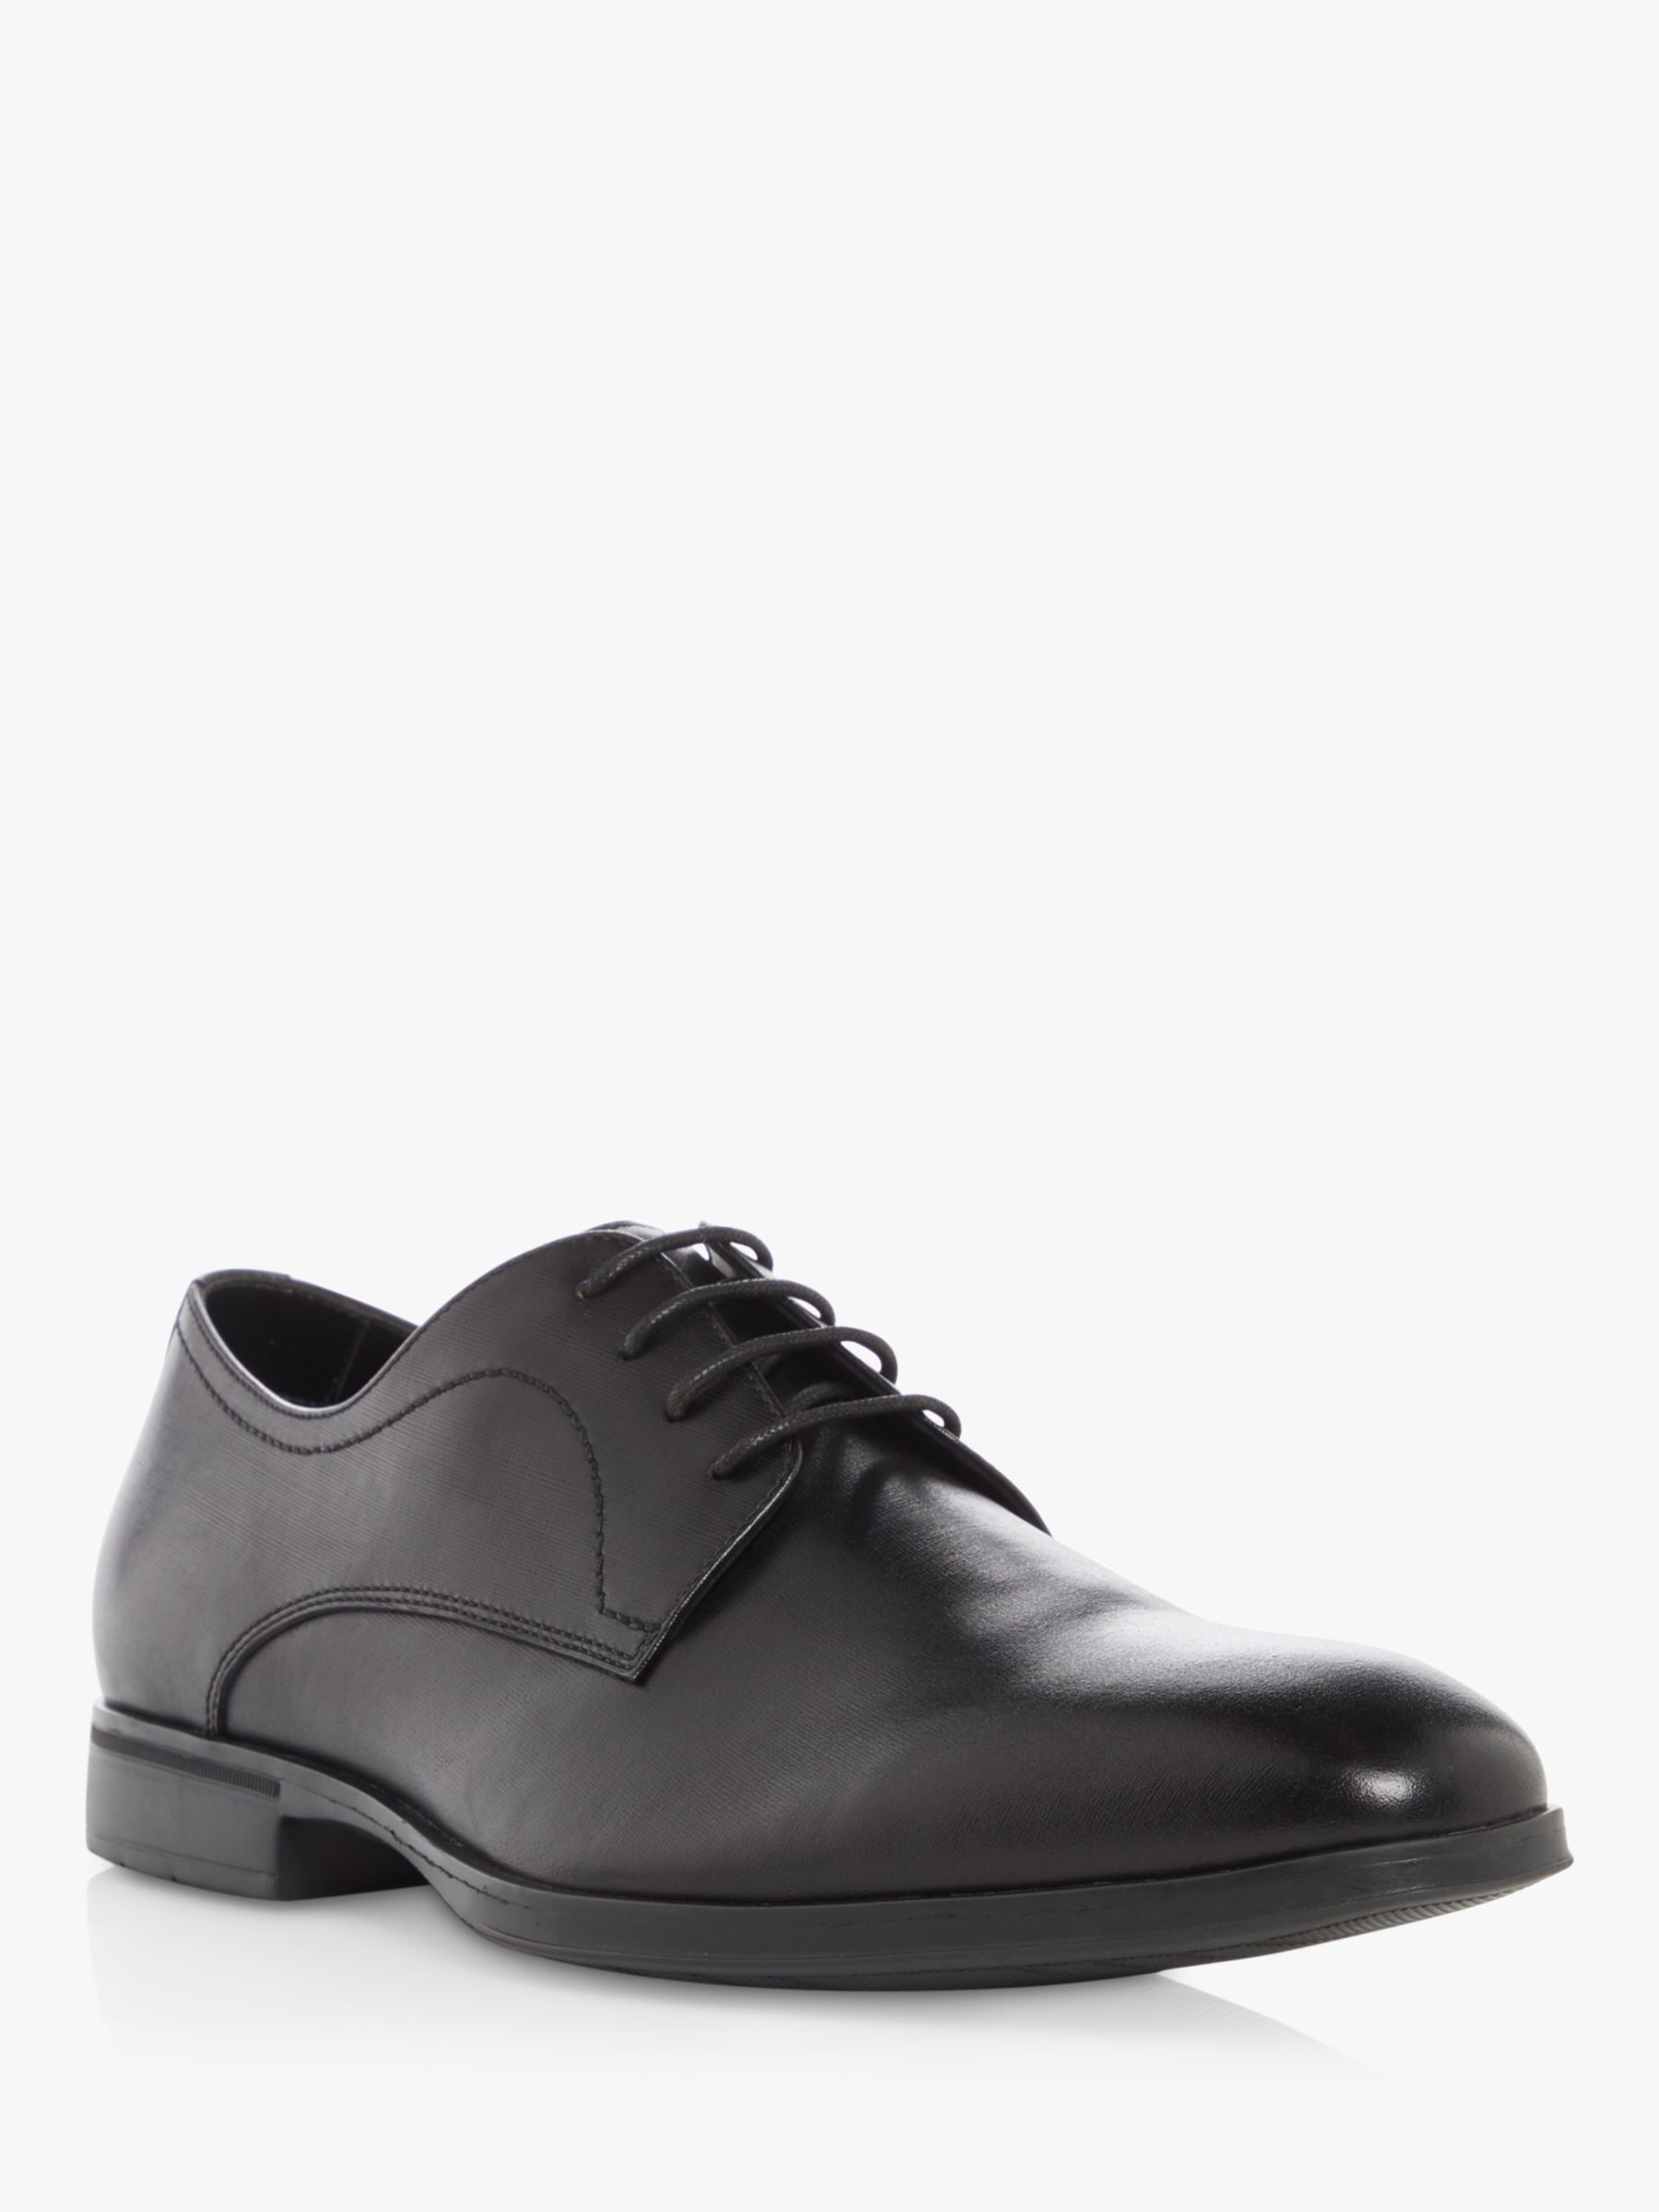 Dune Squeeze Leather Oxford Shoes